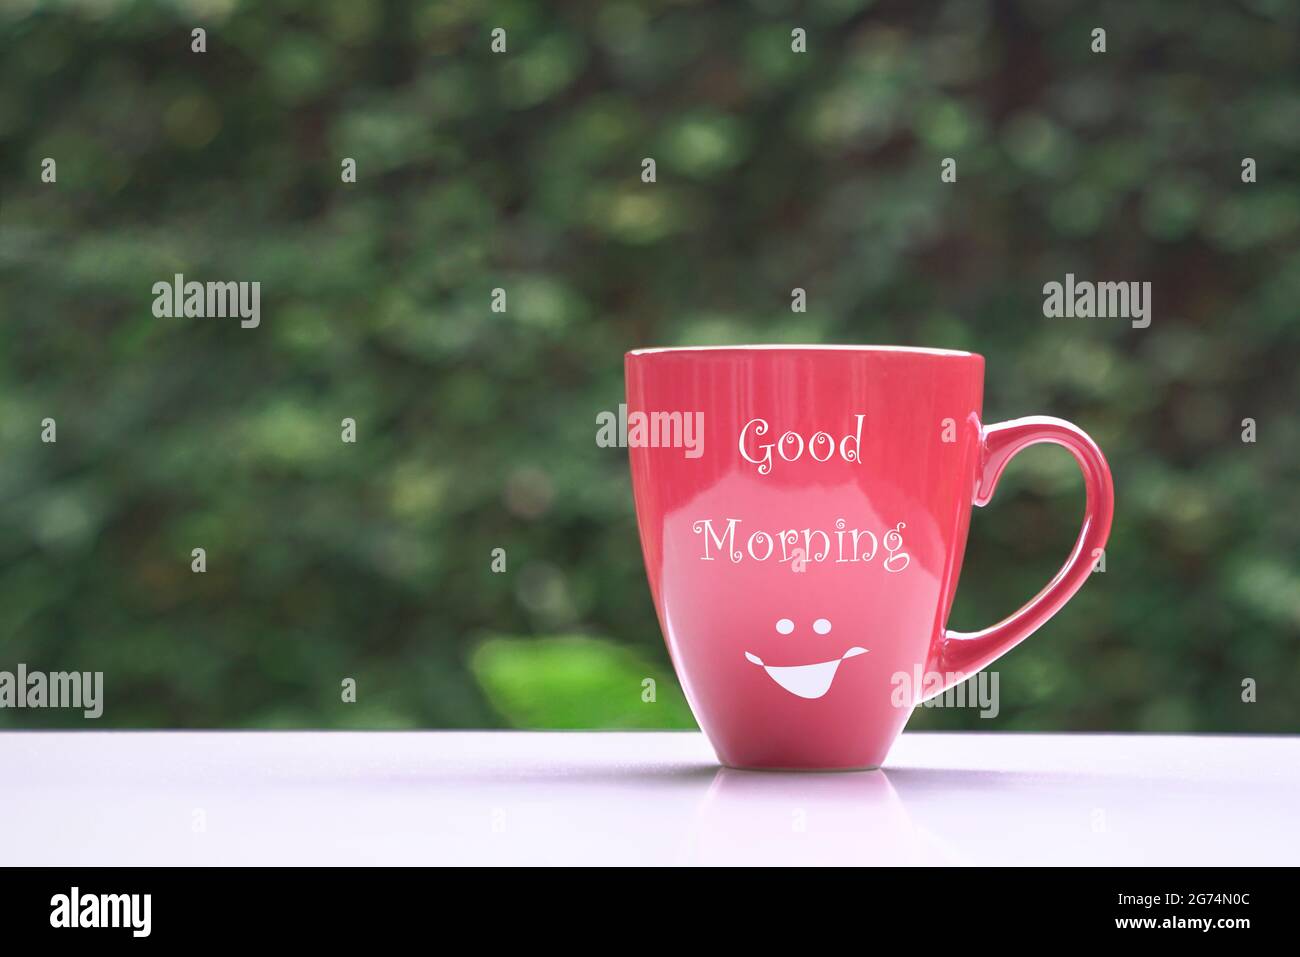 Good morning message on red coffee cup, on green nature background ...